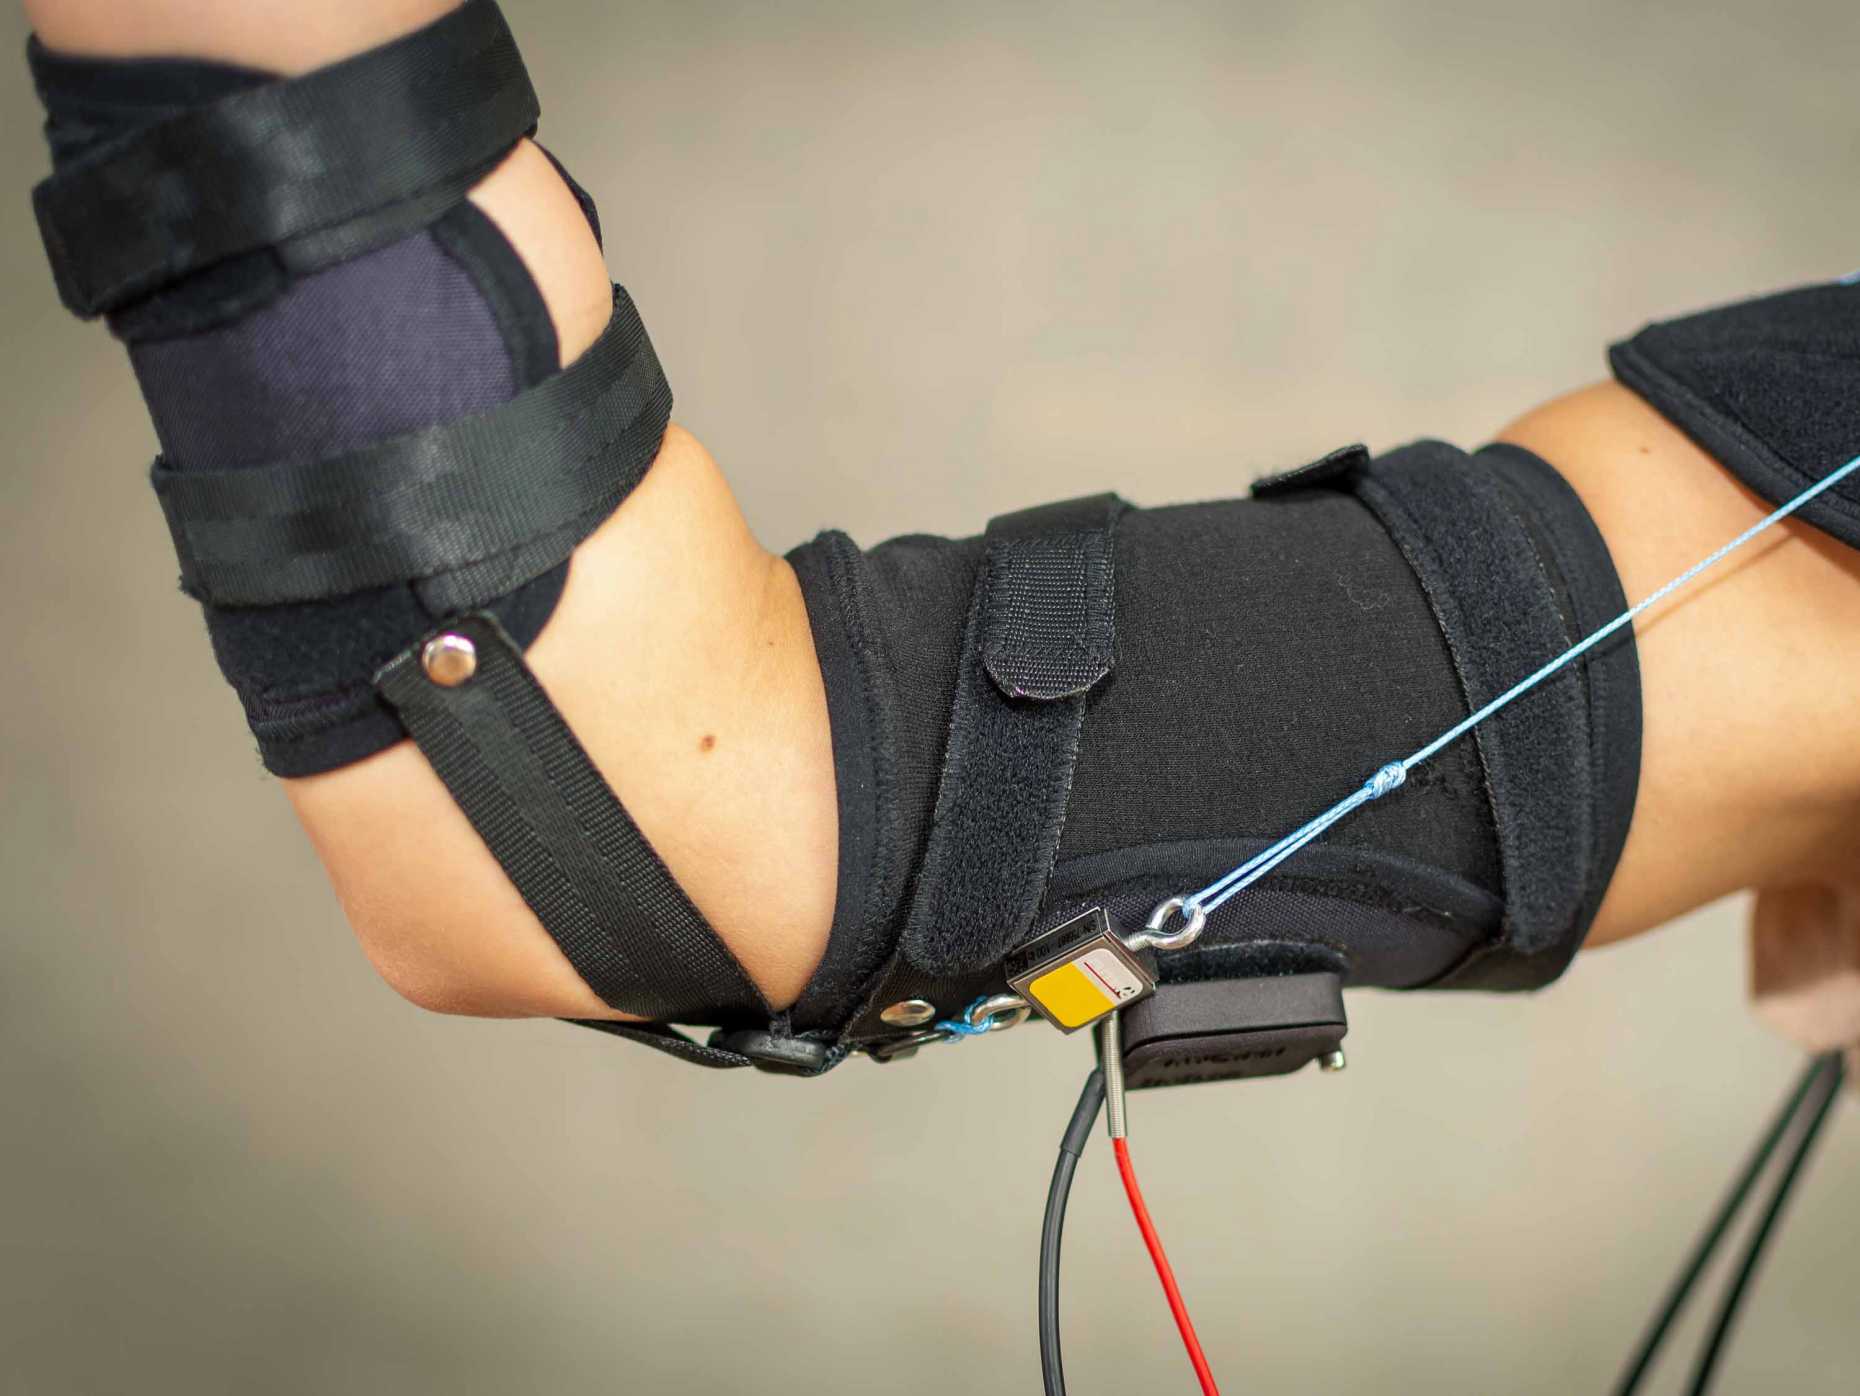 A researcher flexes their bicep while wearing the cuff of the exomuscle.